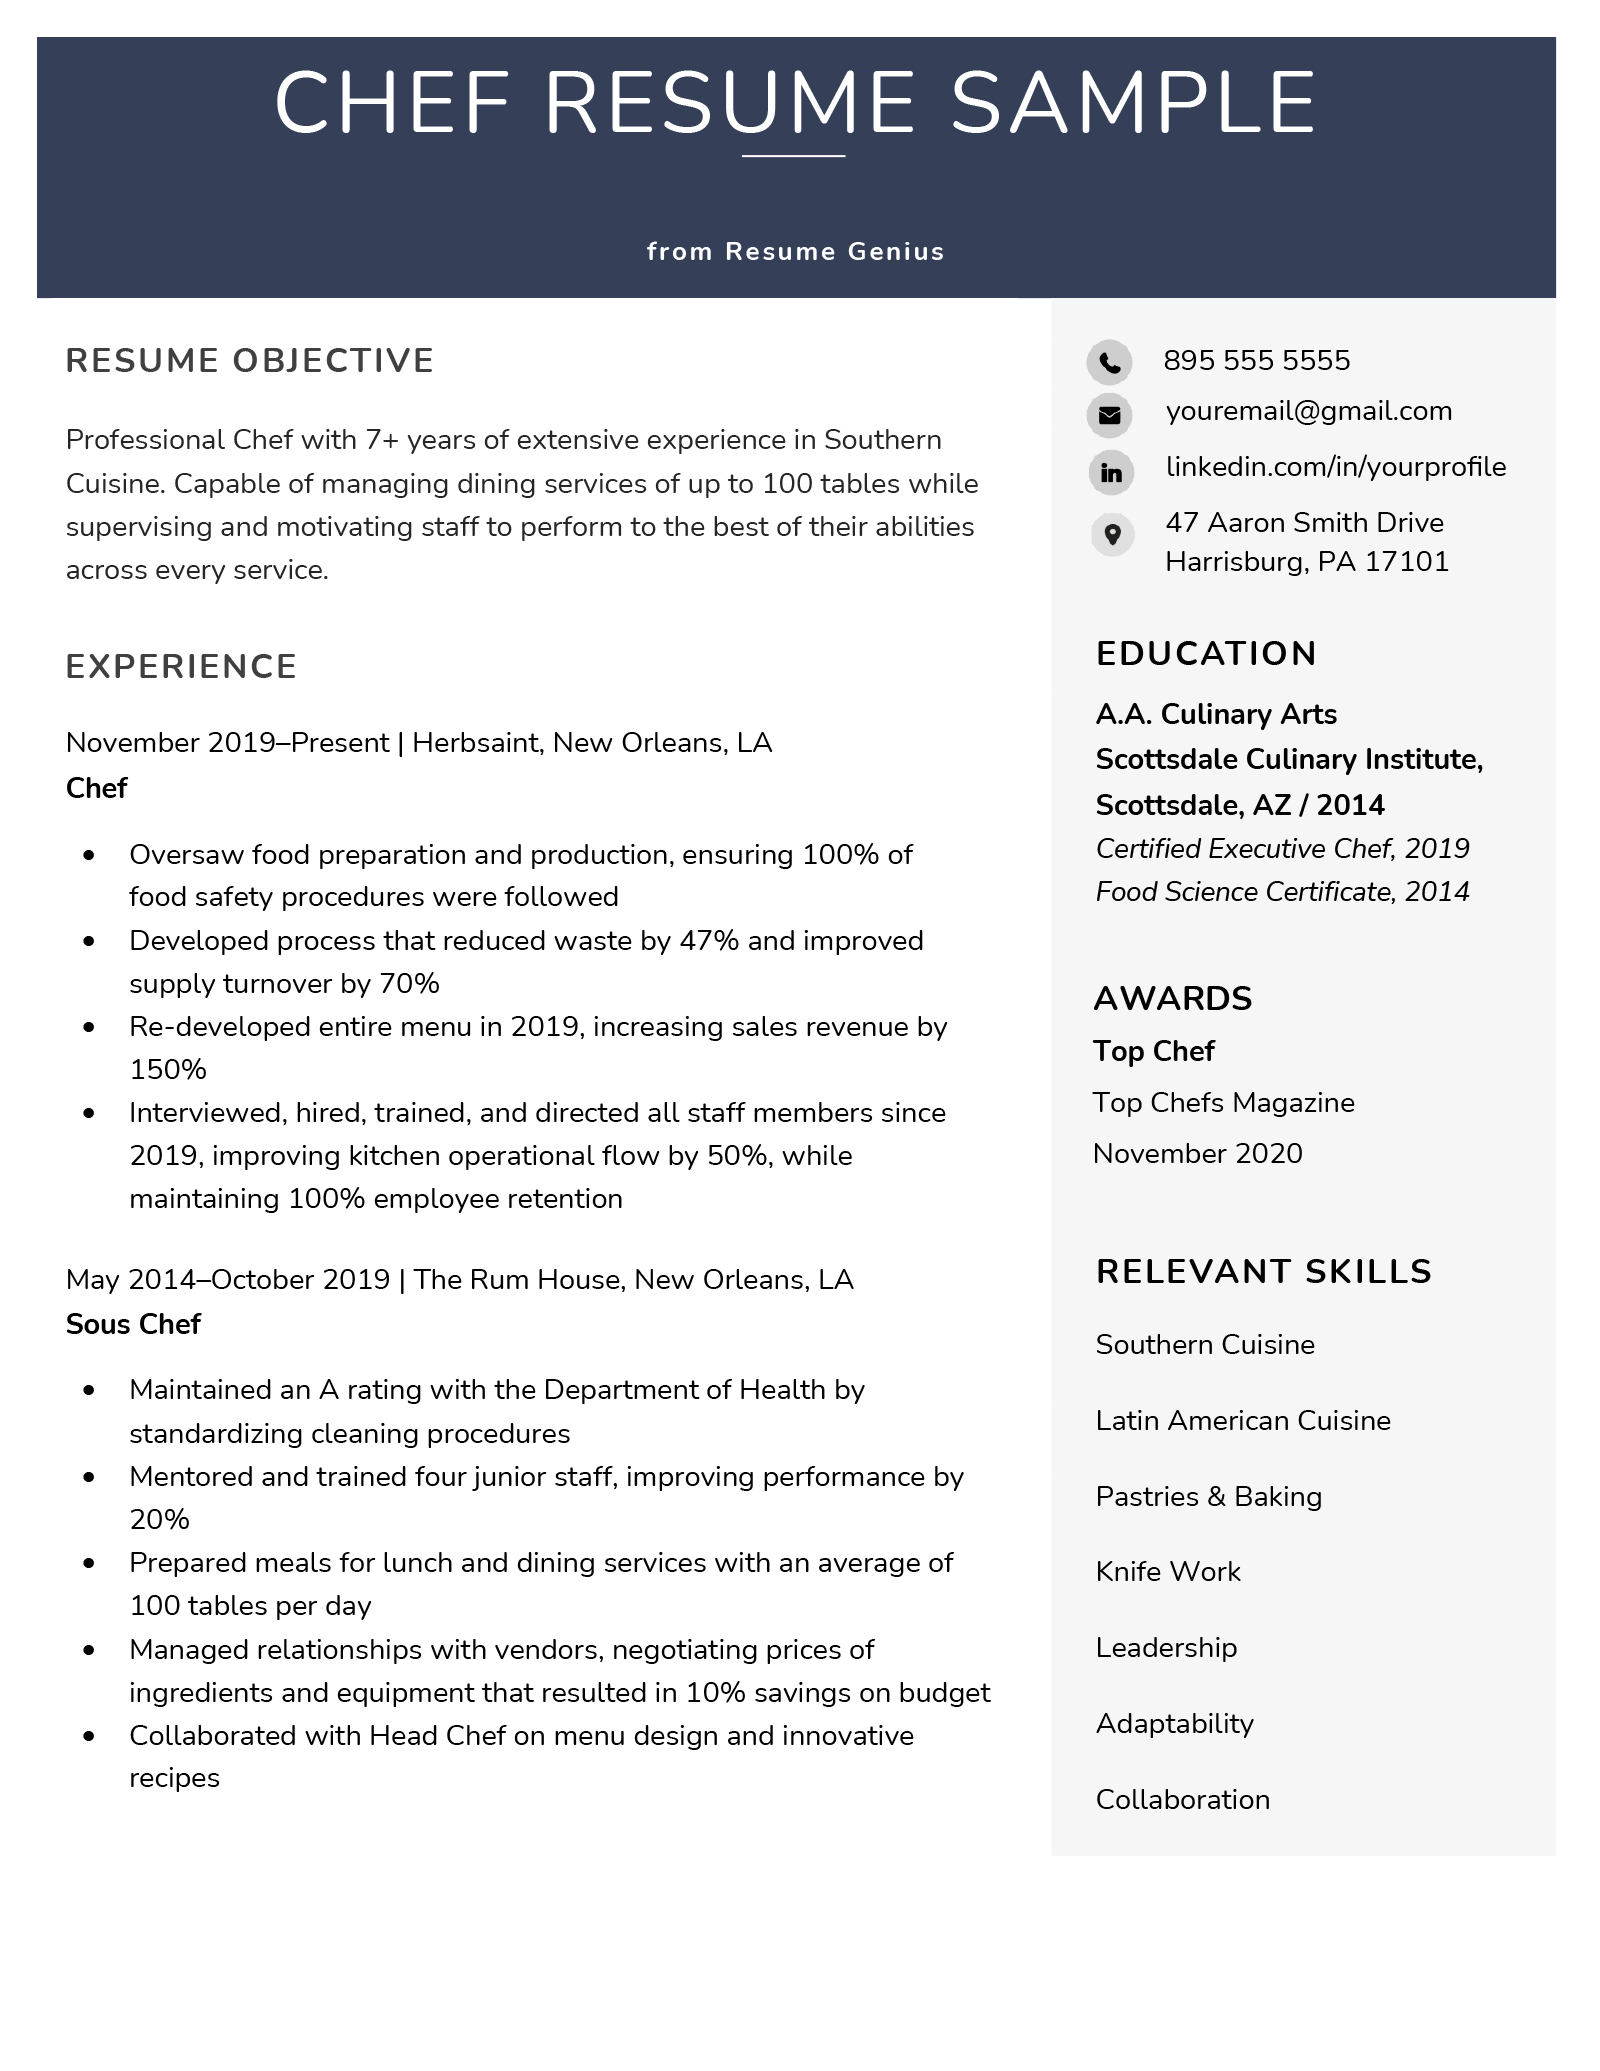 A chef resume example with a bold header and sections for the applicant's resume objective, work history, awards, and relevant skills